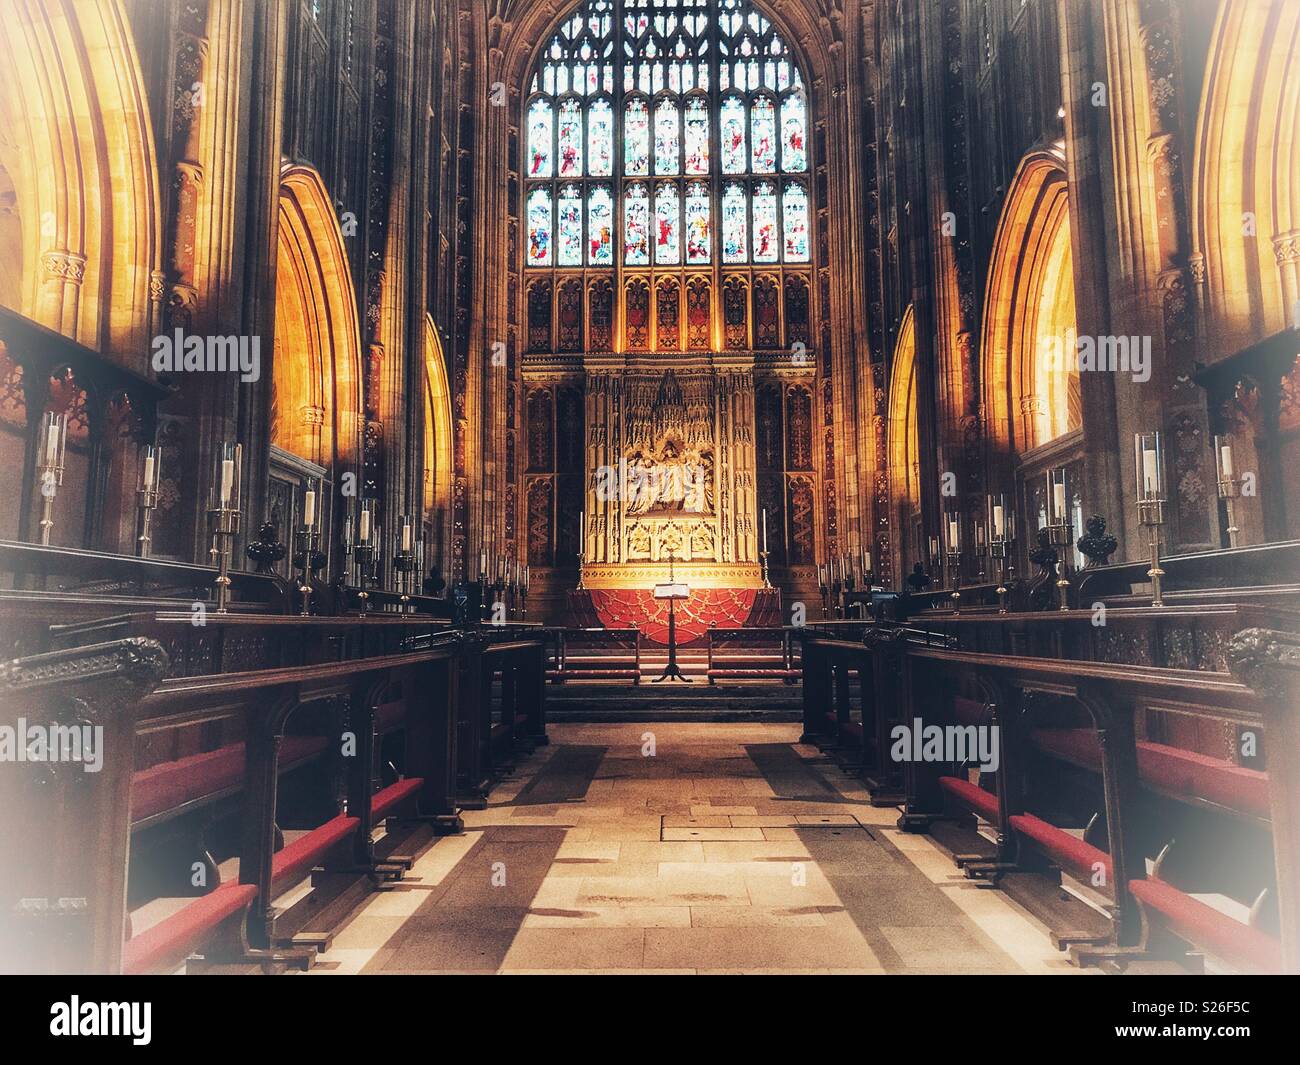 Altar, choir stalls, stained glass window, in the magnificent Sherborne Abbey, Sherborne, Dorset, England Stock Photo